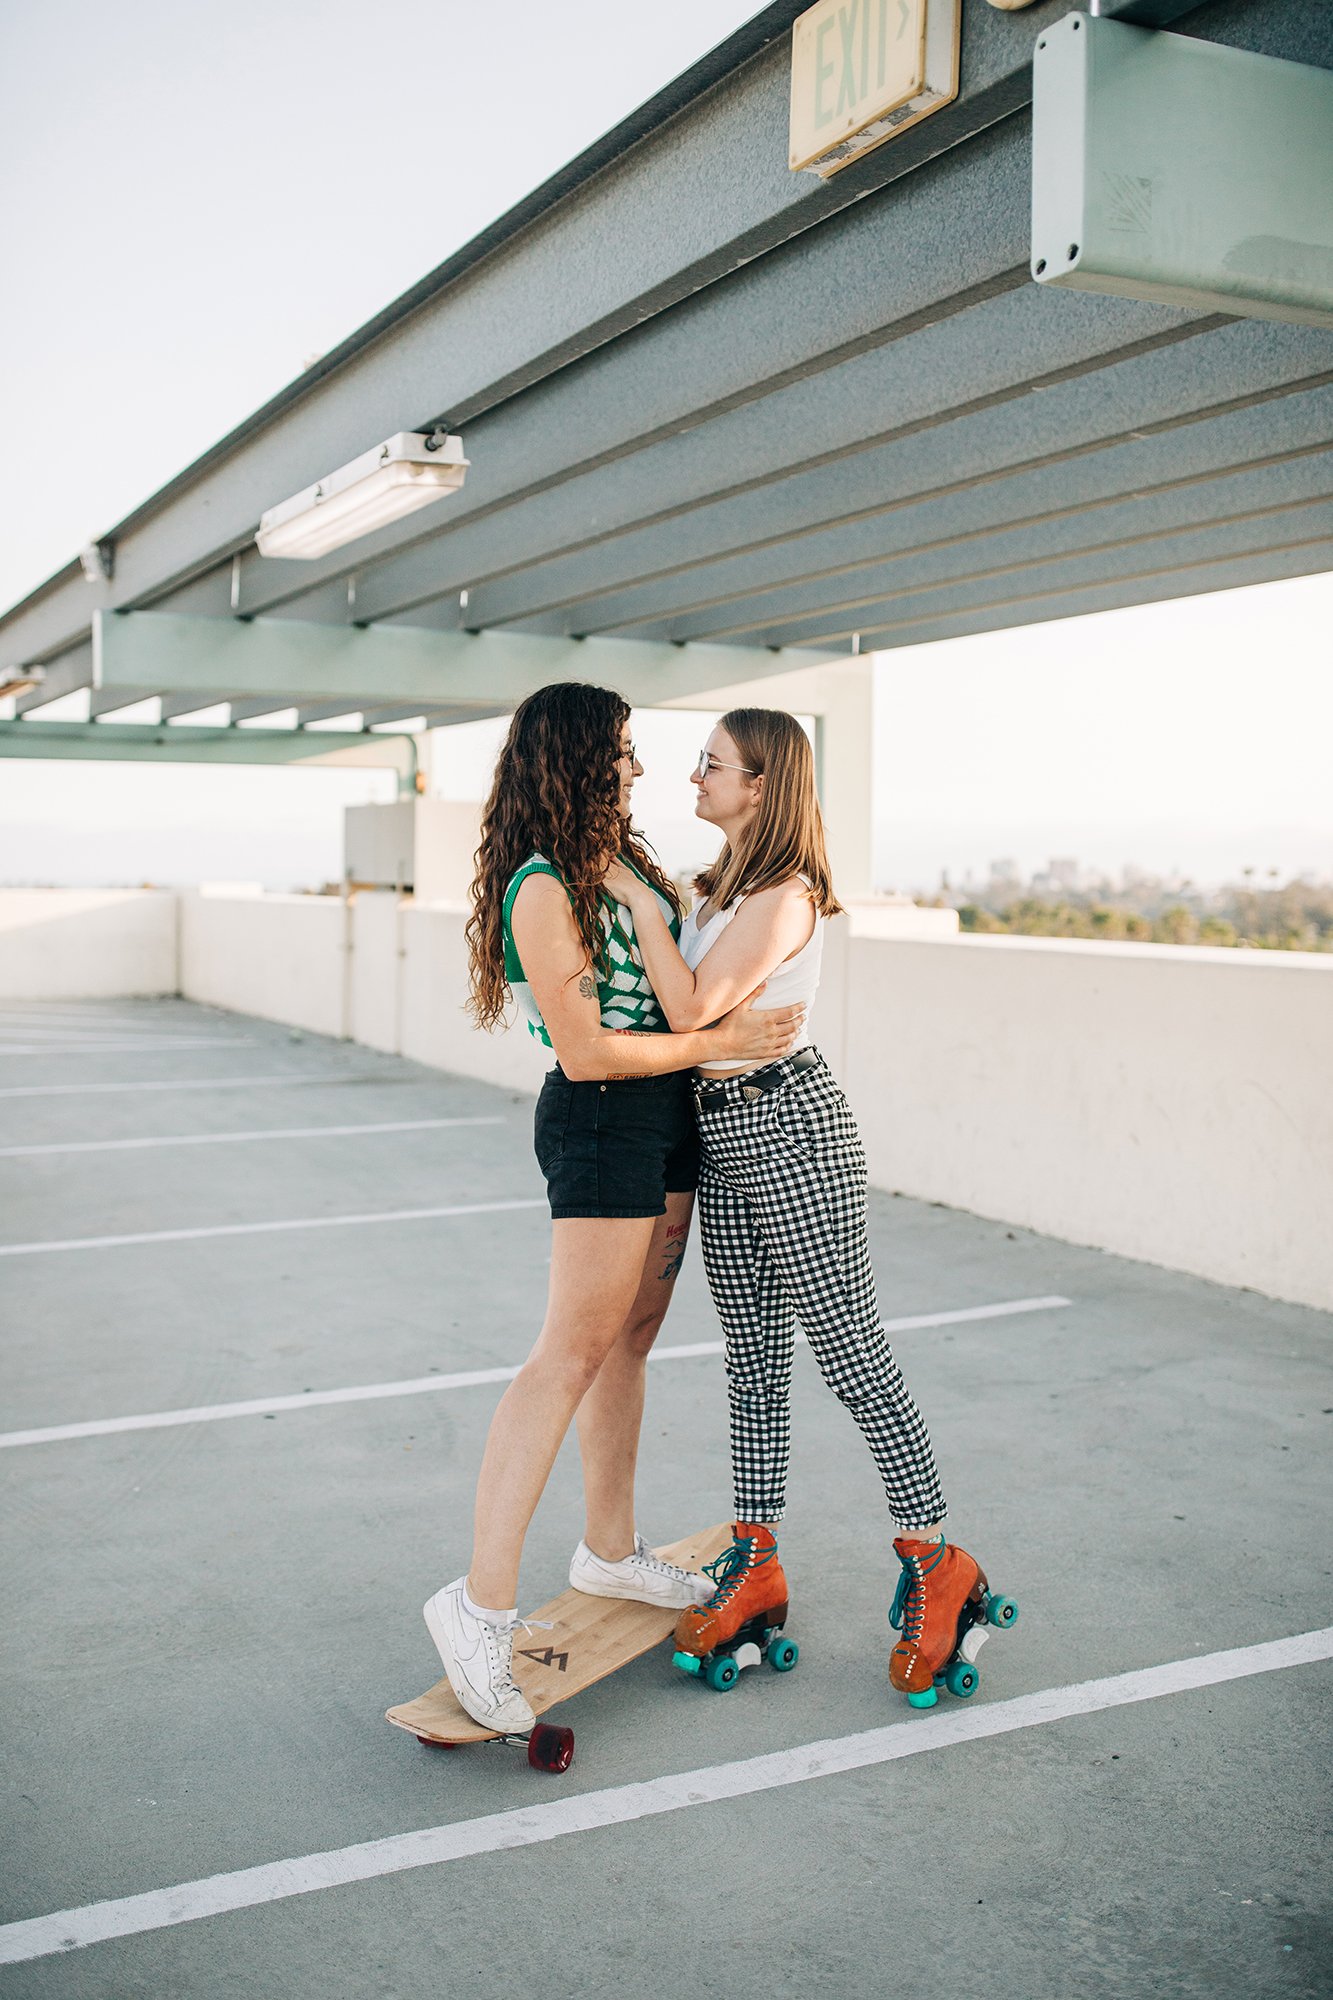 Clarisse and Steph skate together for a couple's photoshoot.